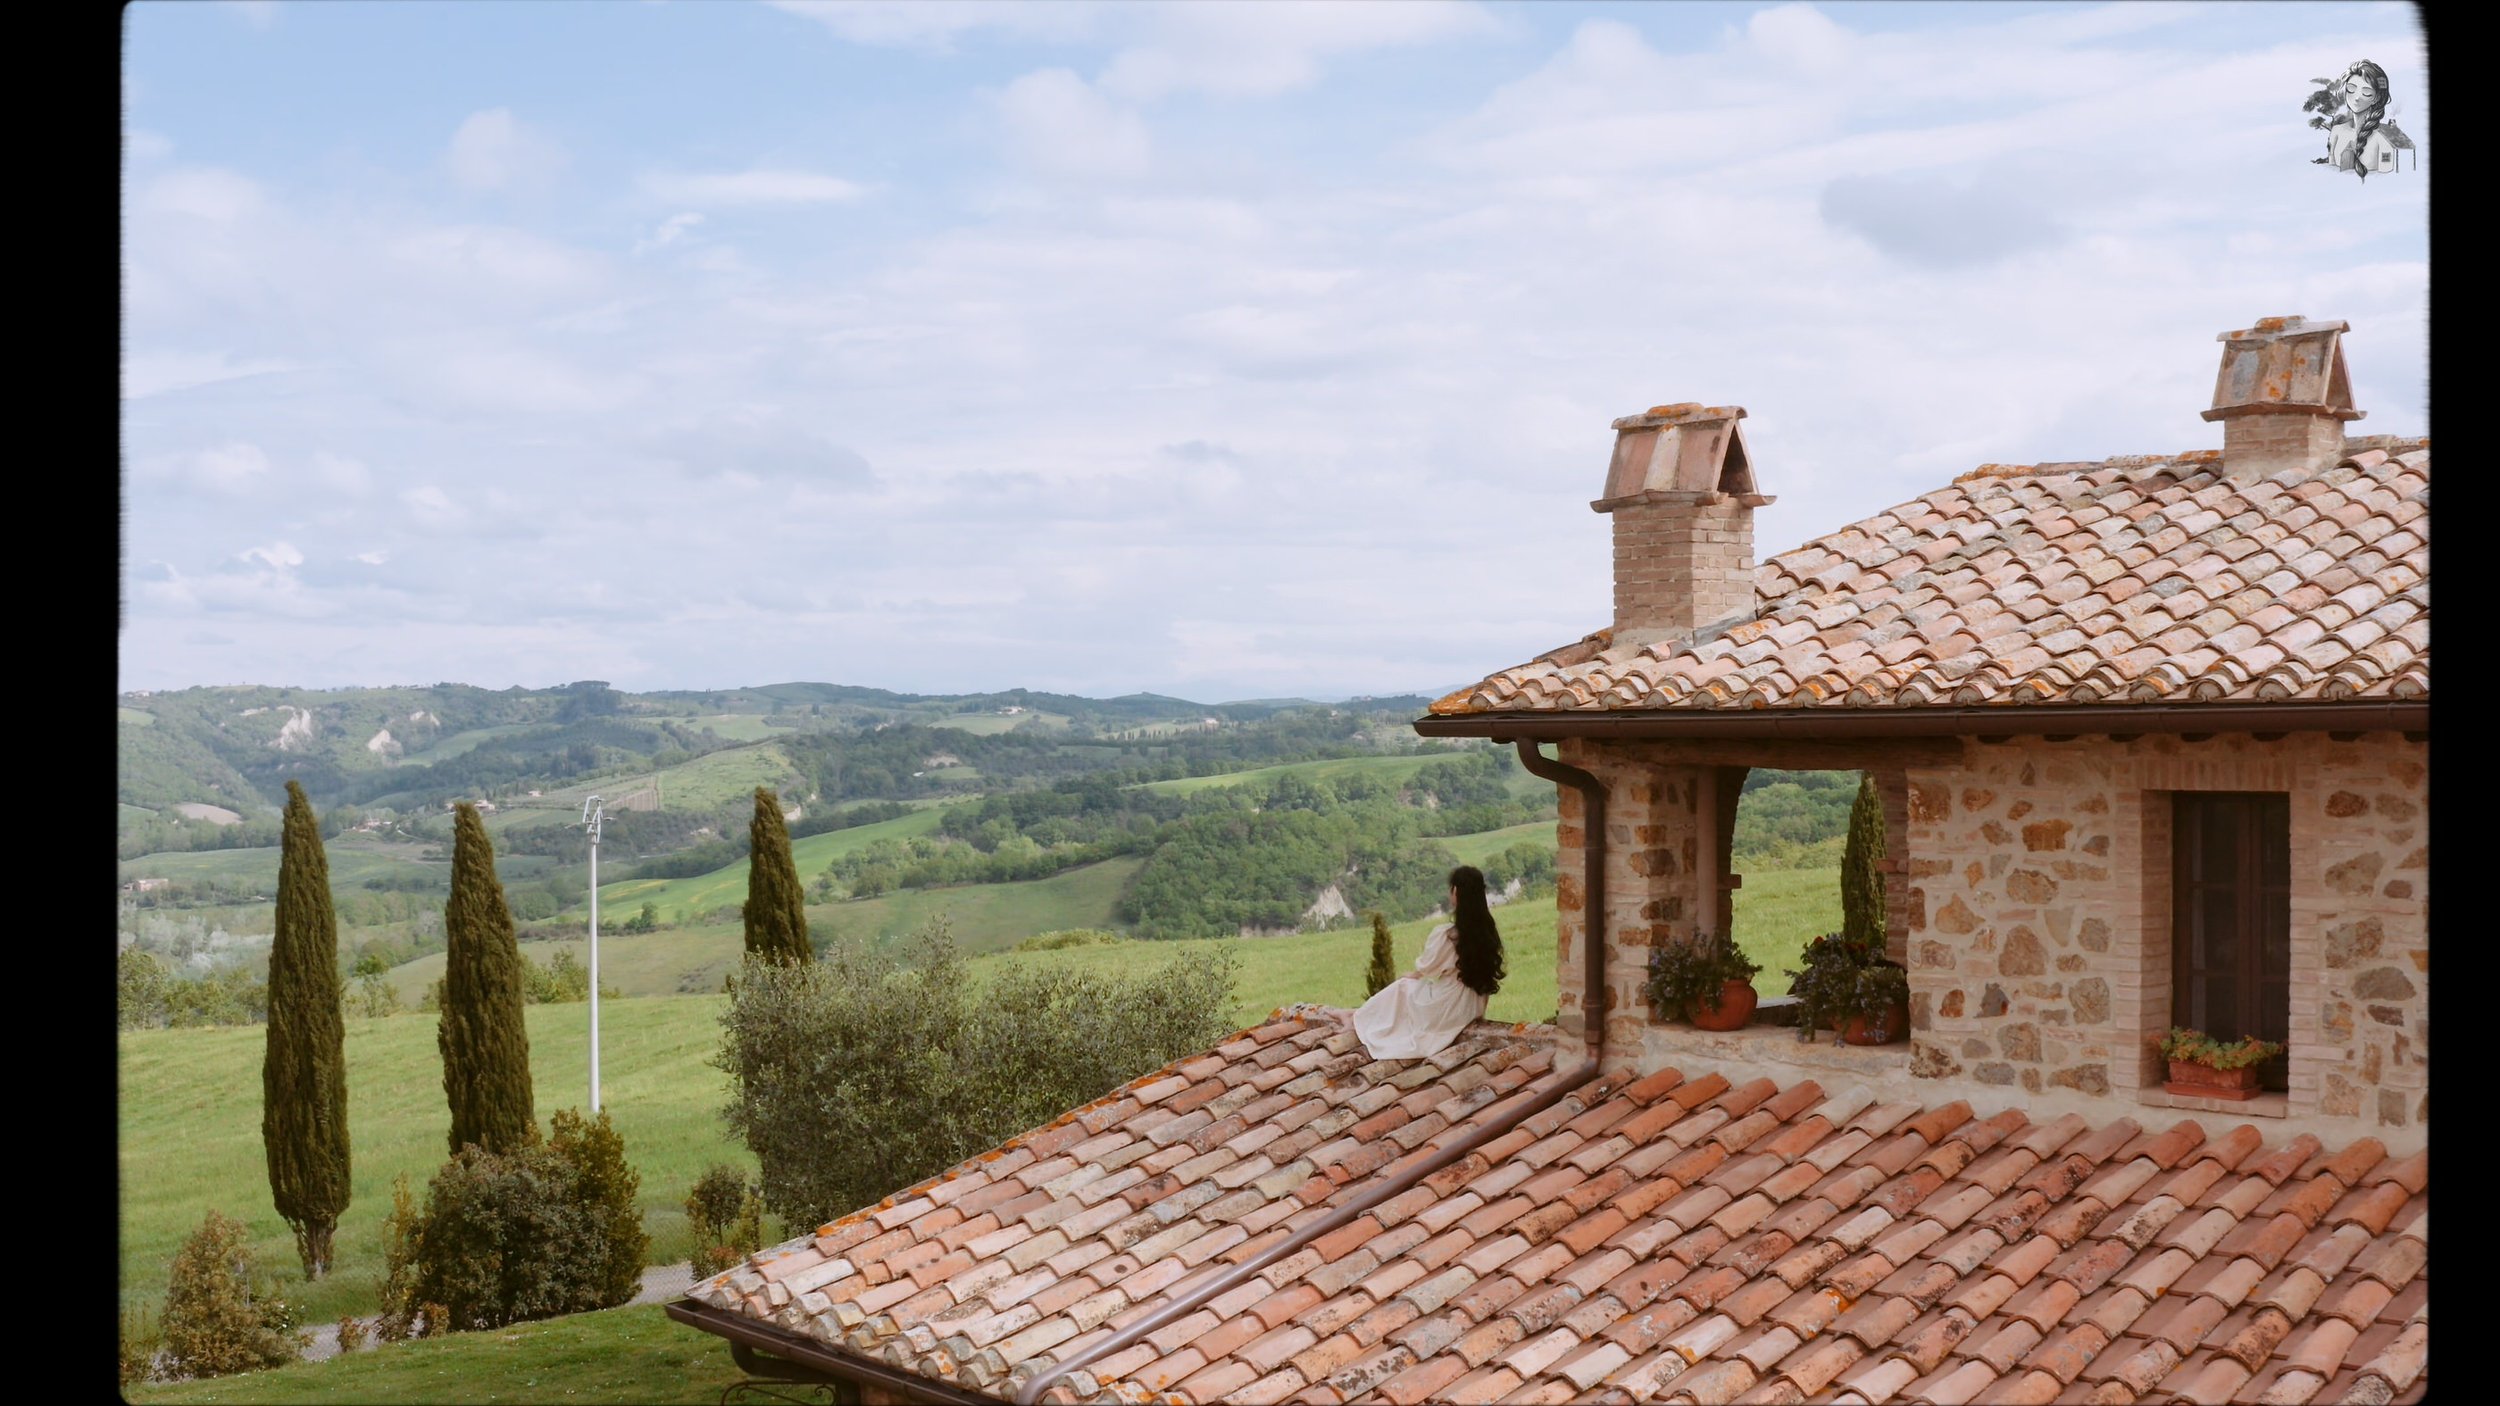 Slow Life in the Italian Countryside - Trip to Tuscany - Her86m2 _1.31.1.jpg